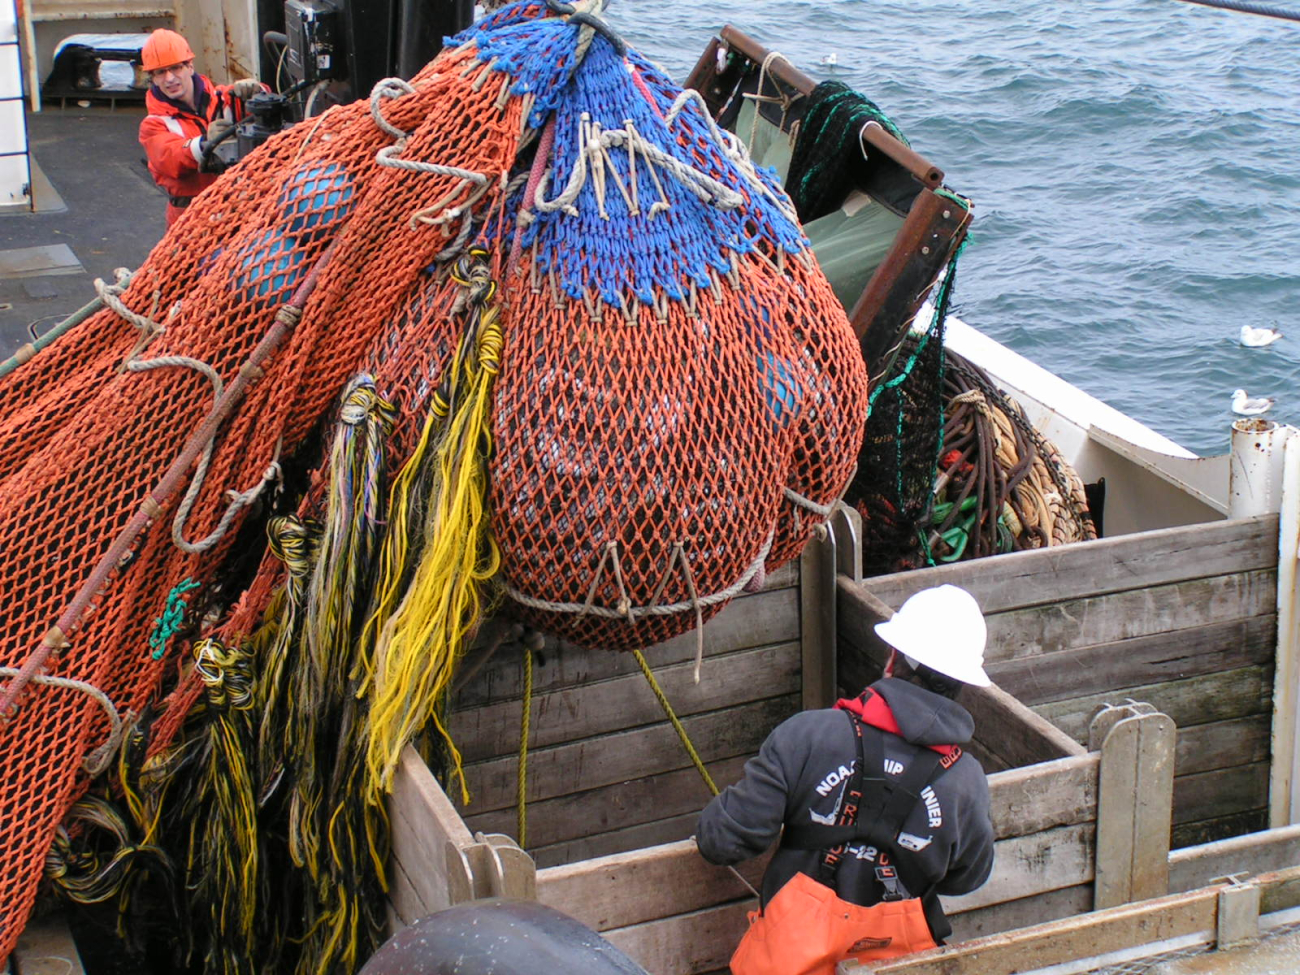 Dumping the cod end of the net into the sorting bins